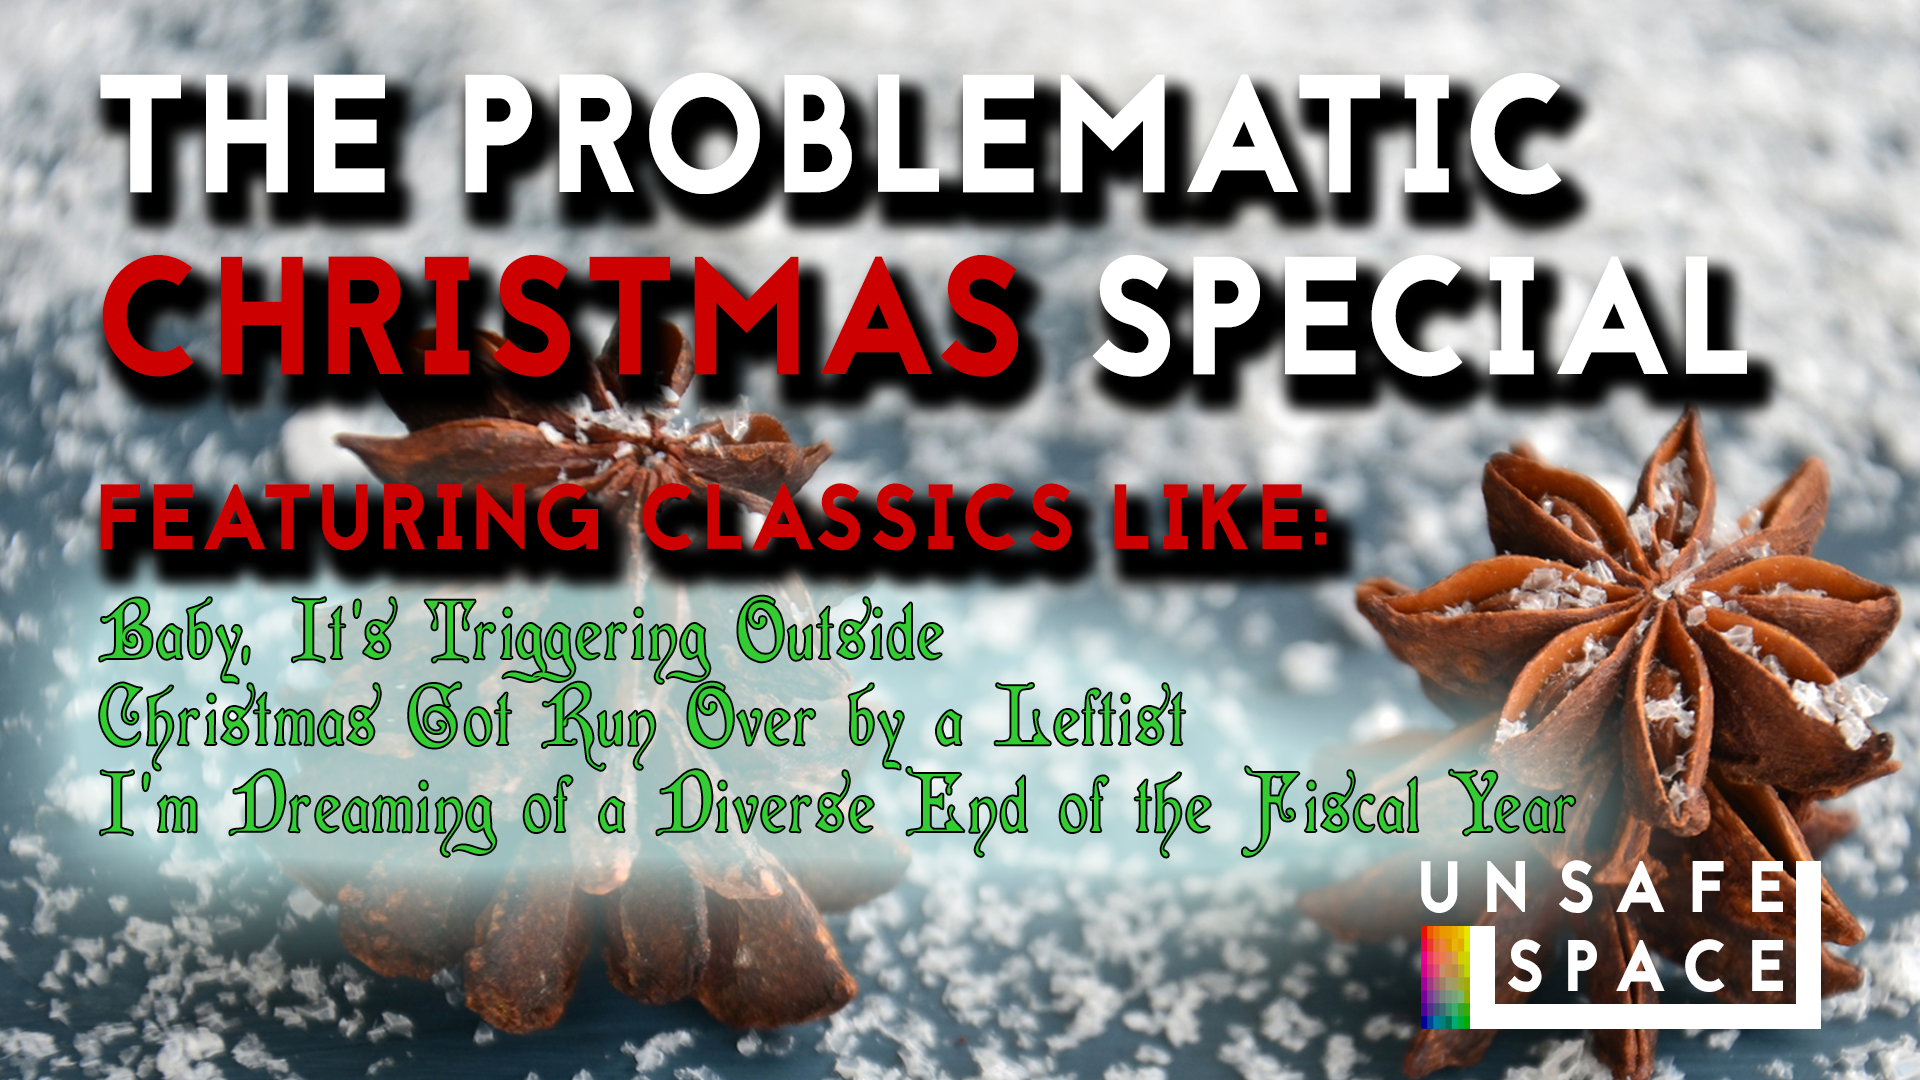 [Episode 046] The Problematic Christmas Special